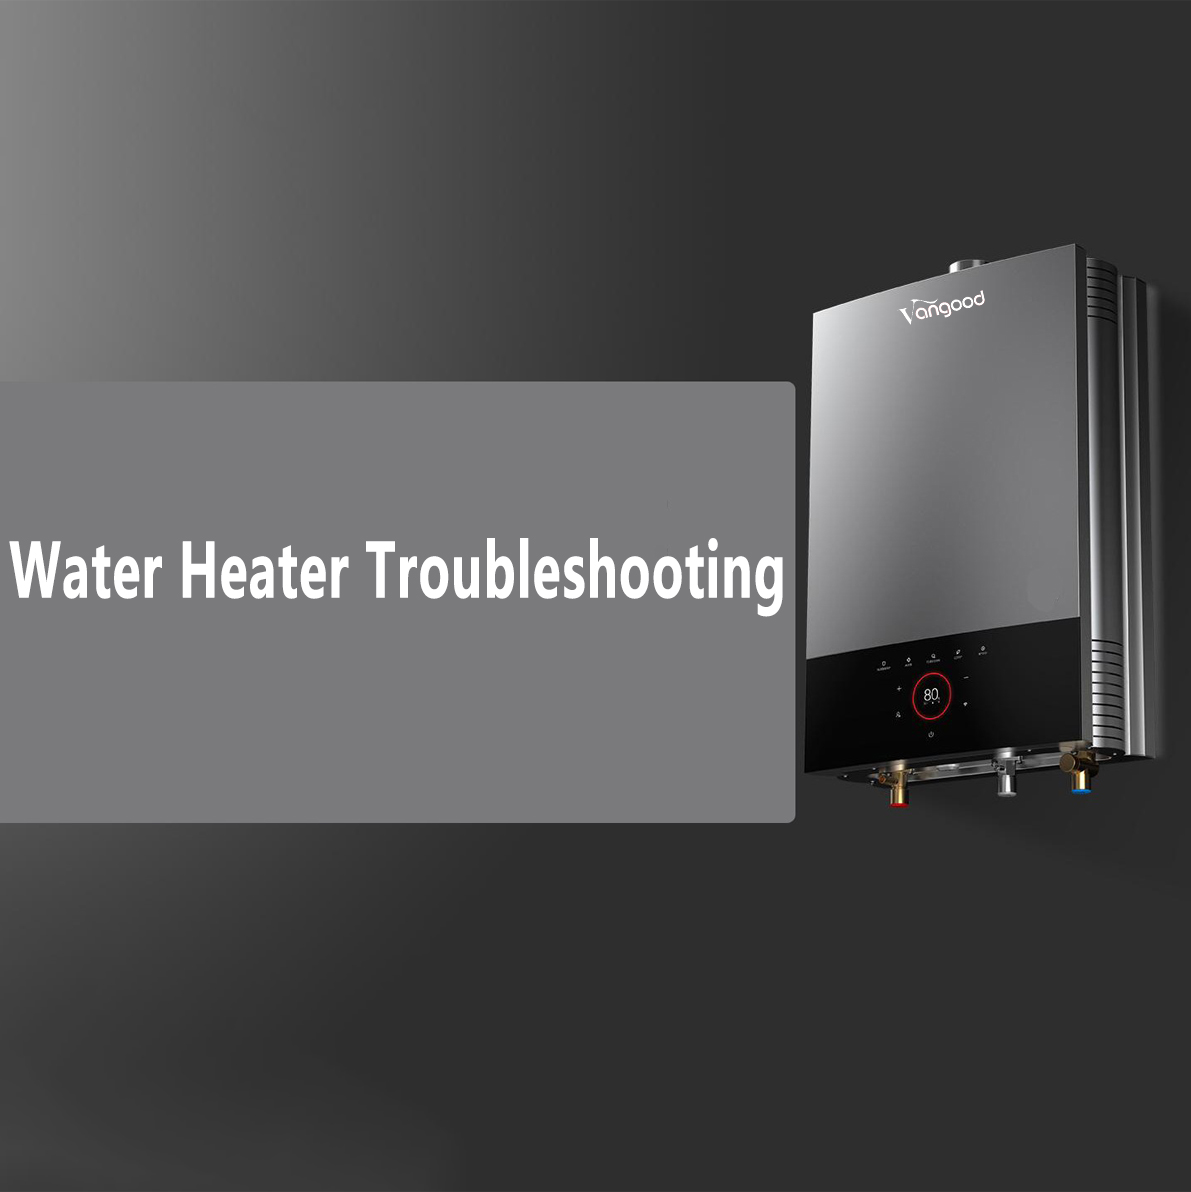 How To Troubleshoot A Gas Water Heater?